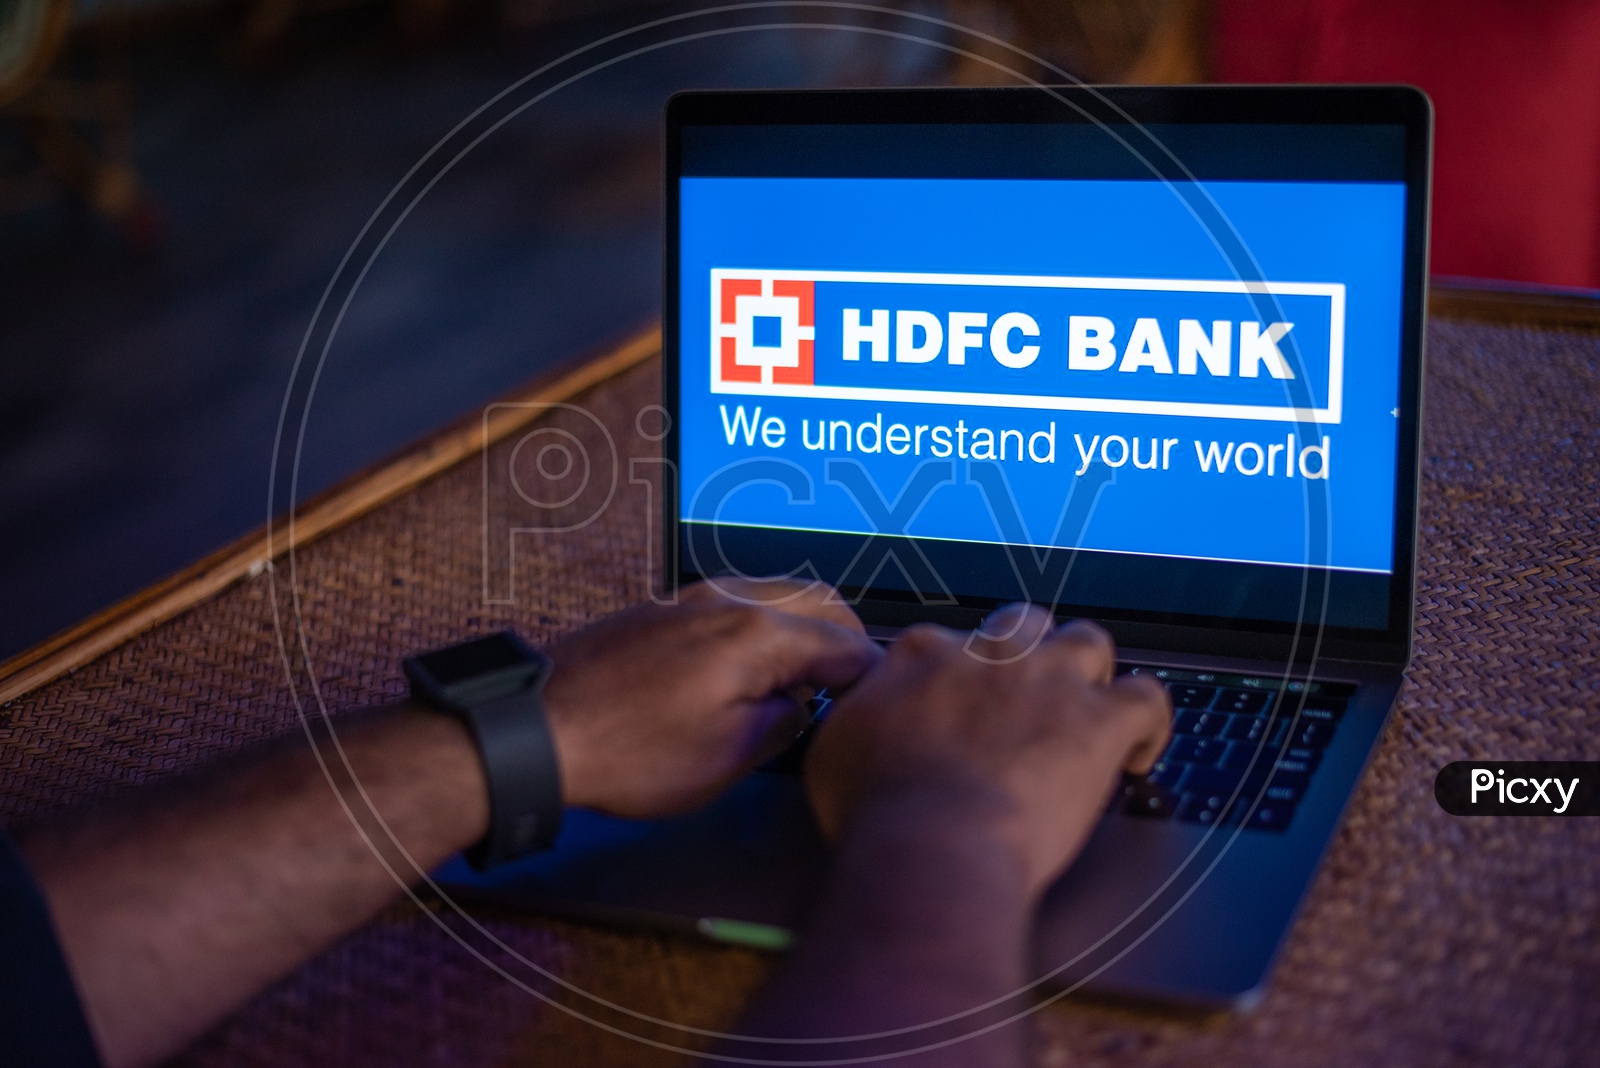 Indian Youth Accessing Online Banking Of HDFC  BANK  in Laptop